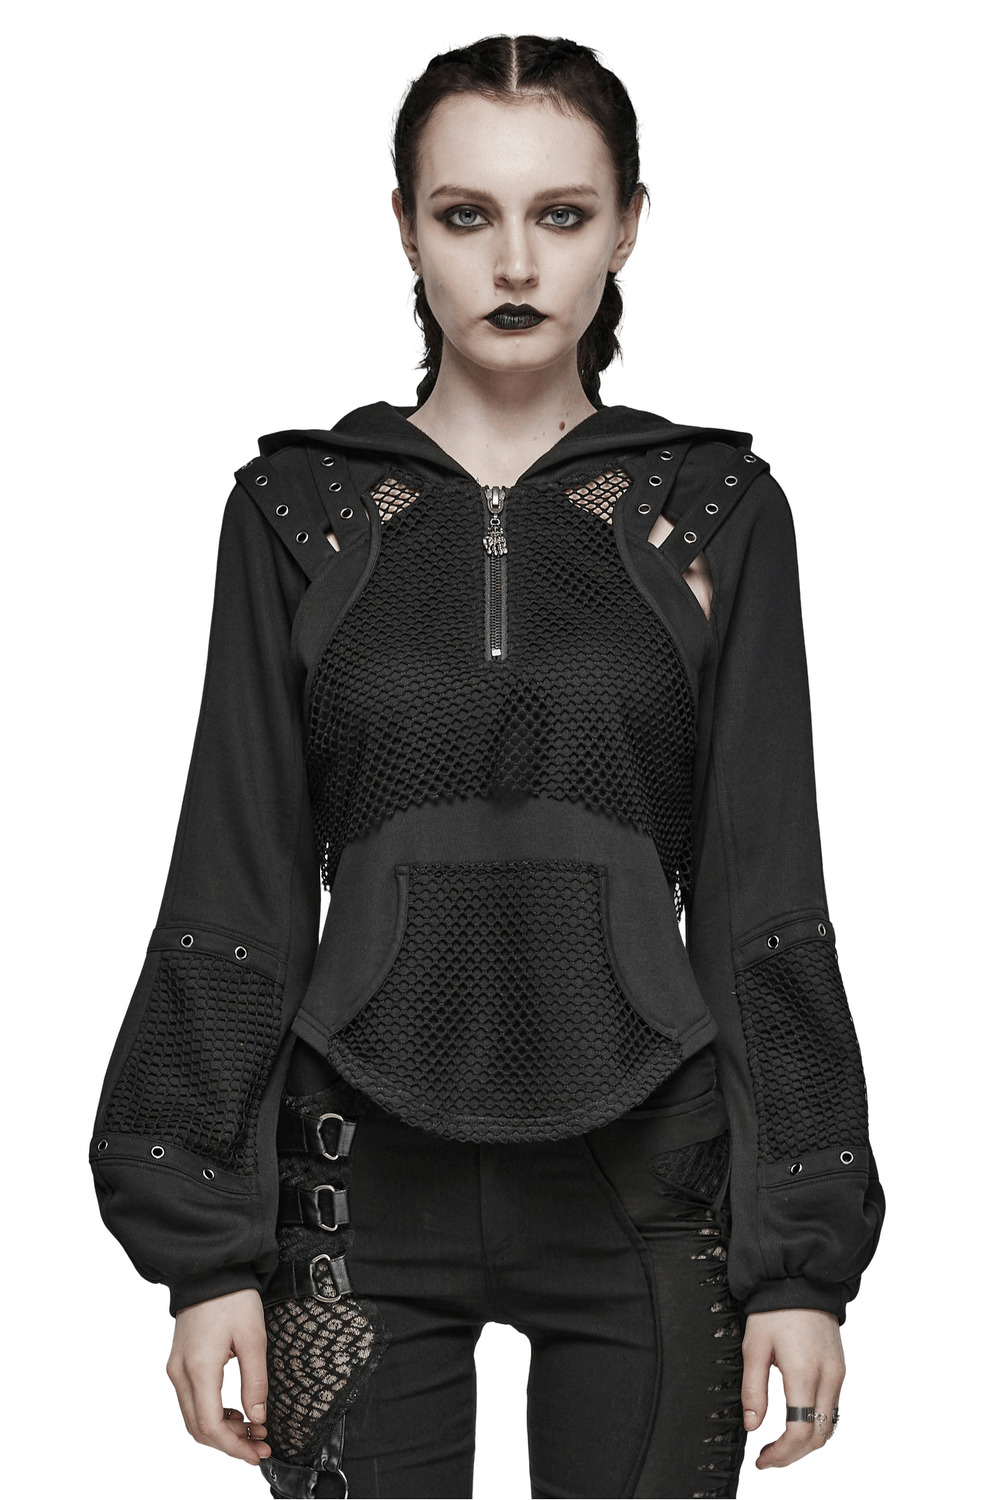 Edgy Streetwear Punk Sweatshirt with Mesh Accents